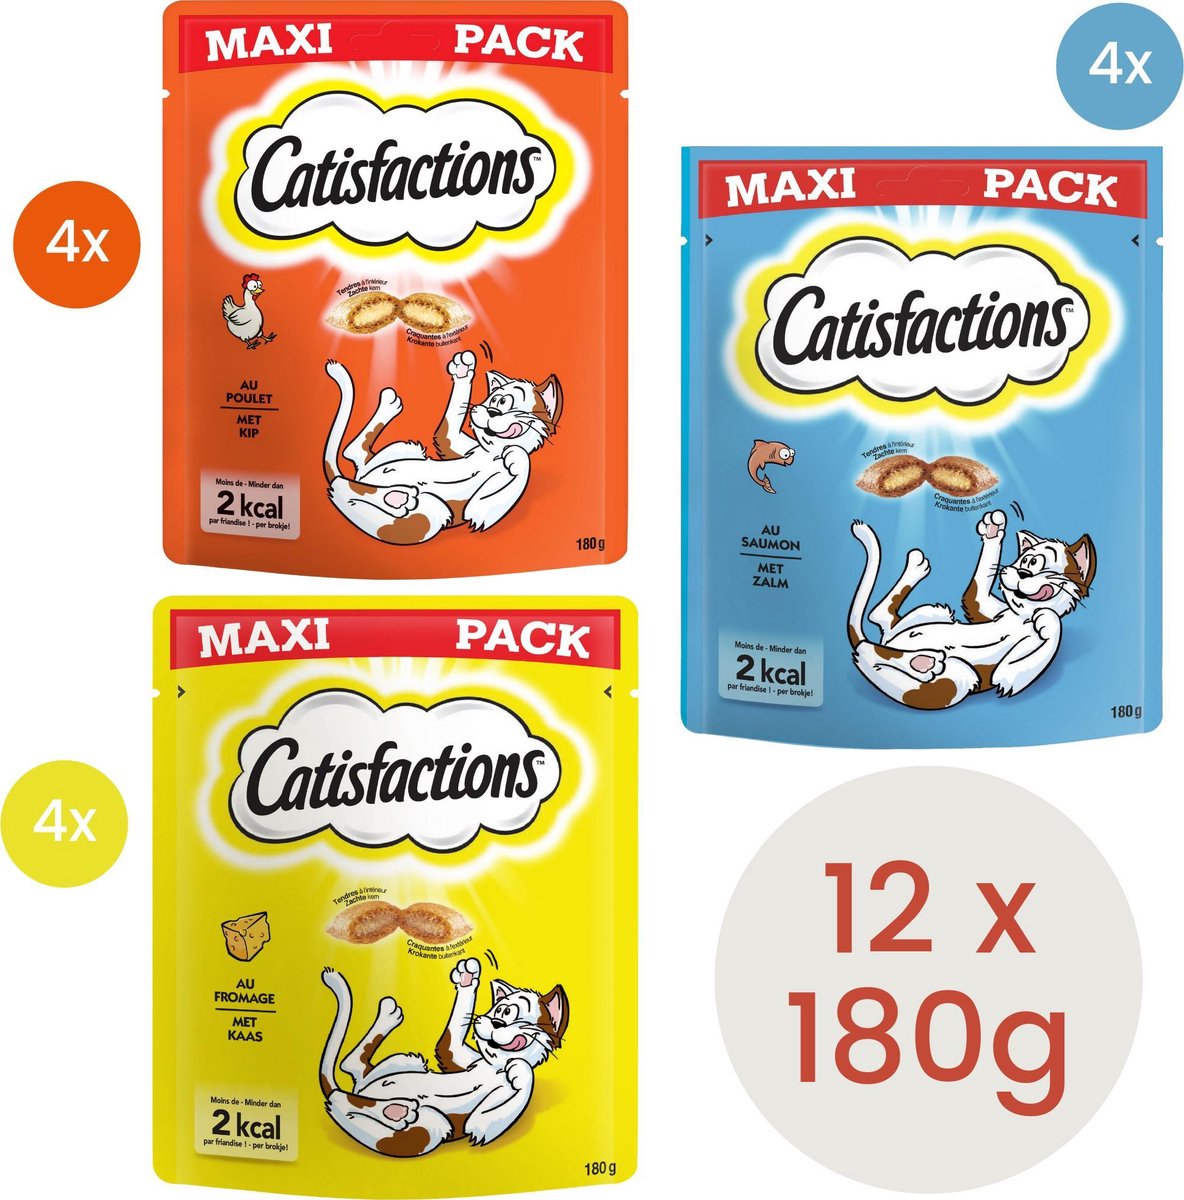 Catisfactions Poulet Friandise pour chat